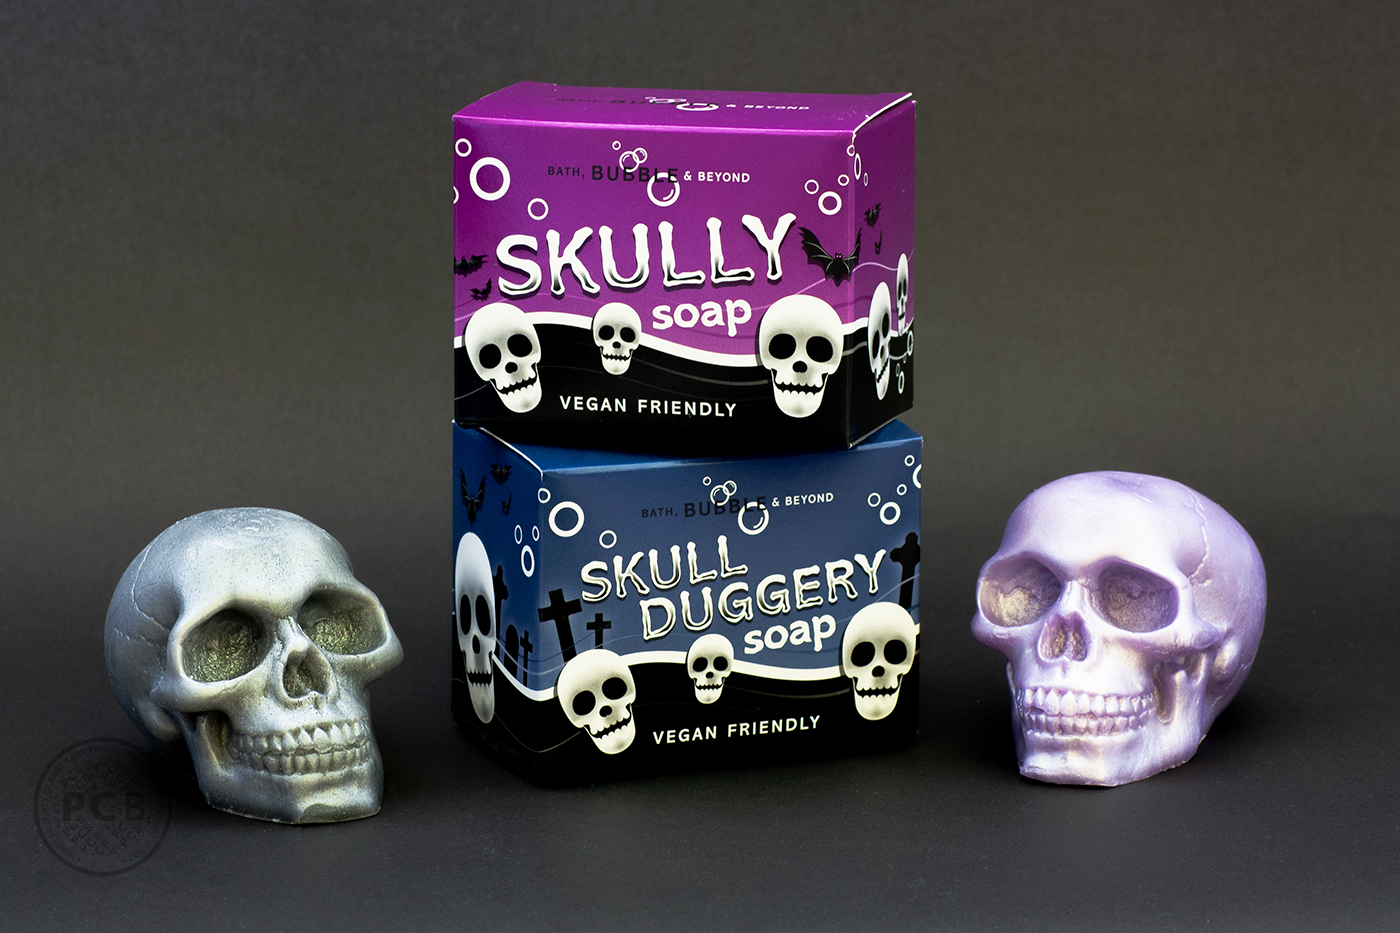 Studio image of two novelty soap cartons and two skull-shaped soaps.